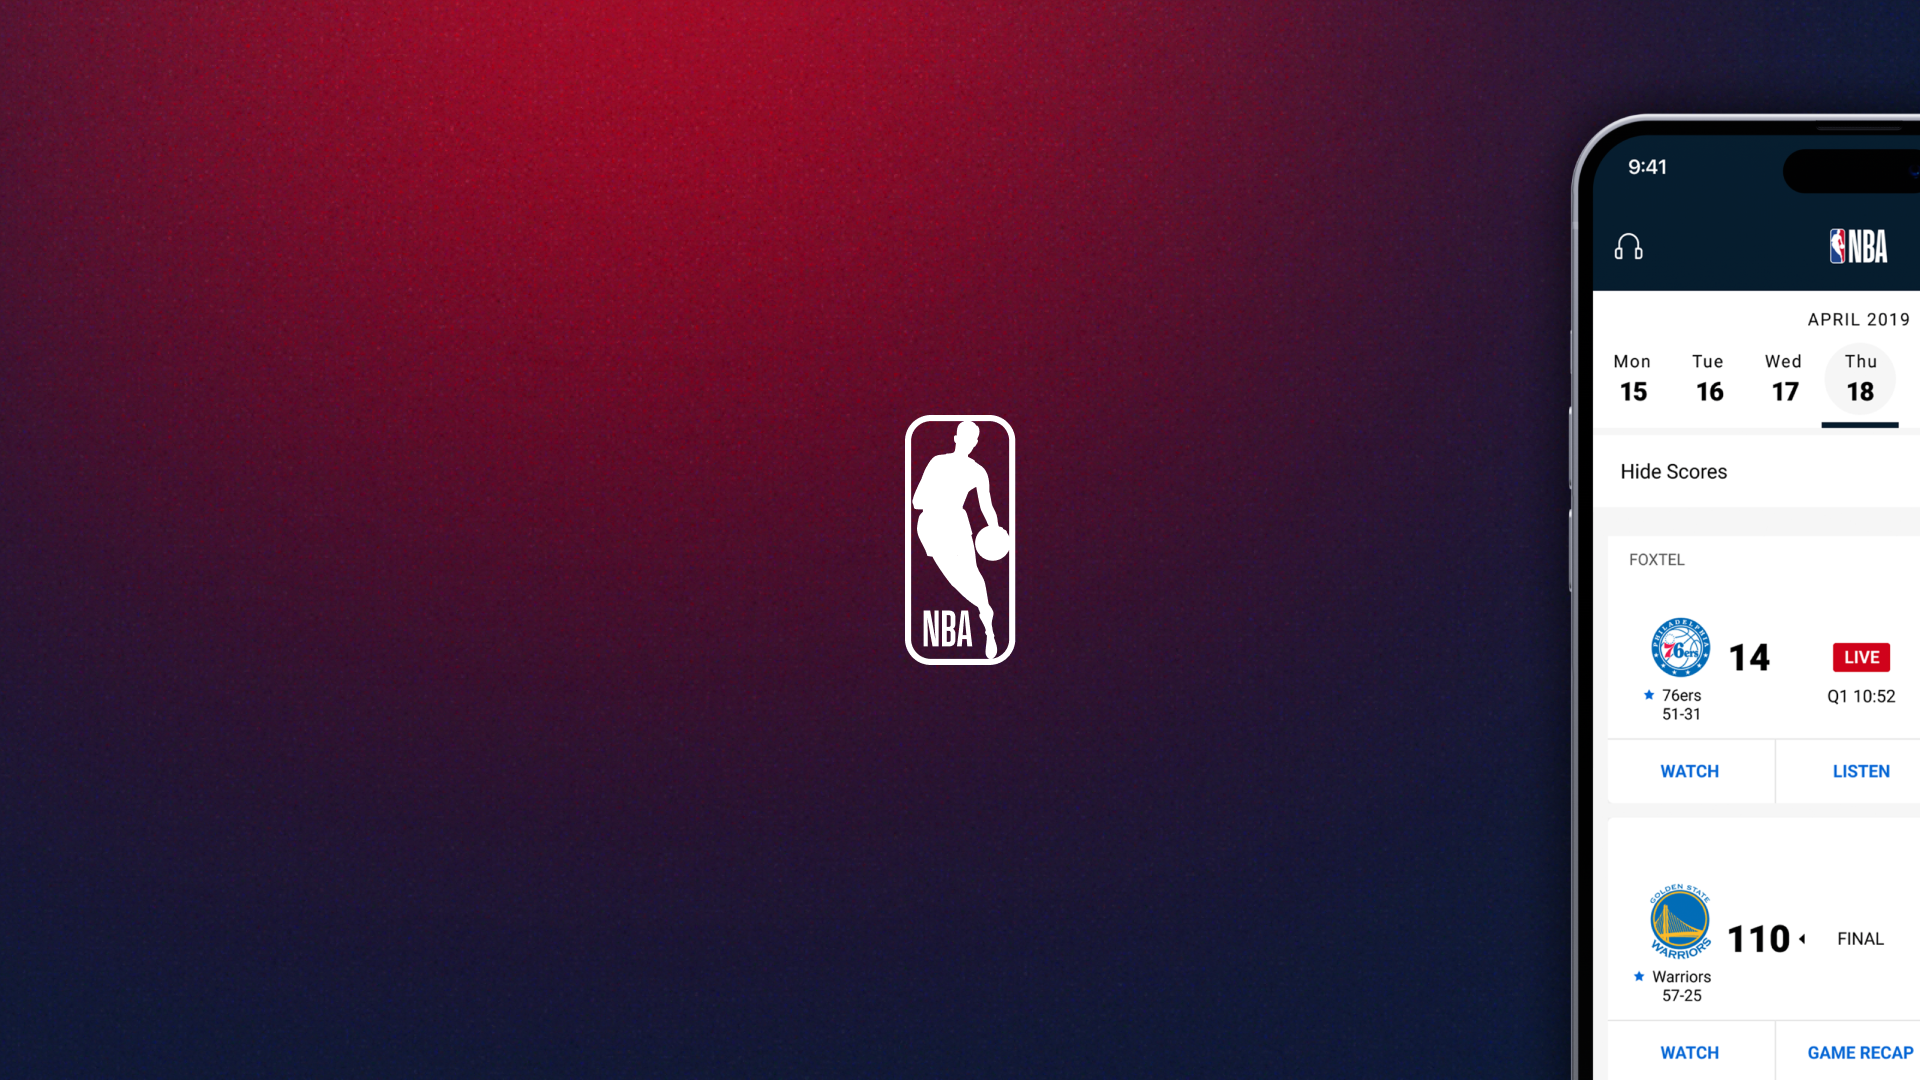 NBA - Overview